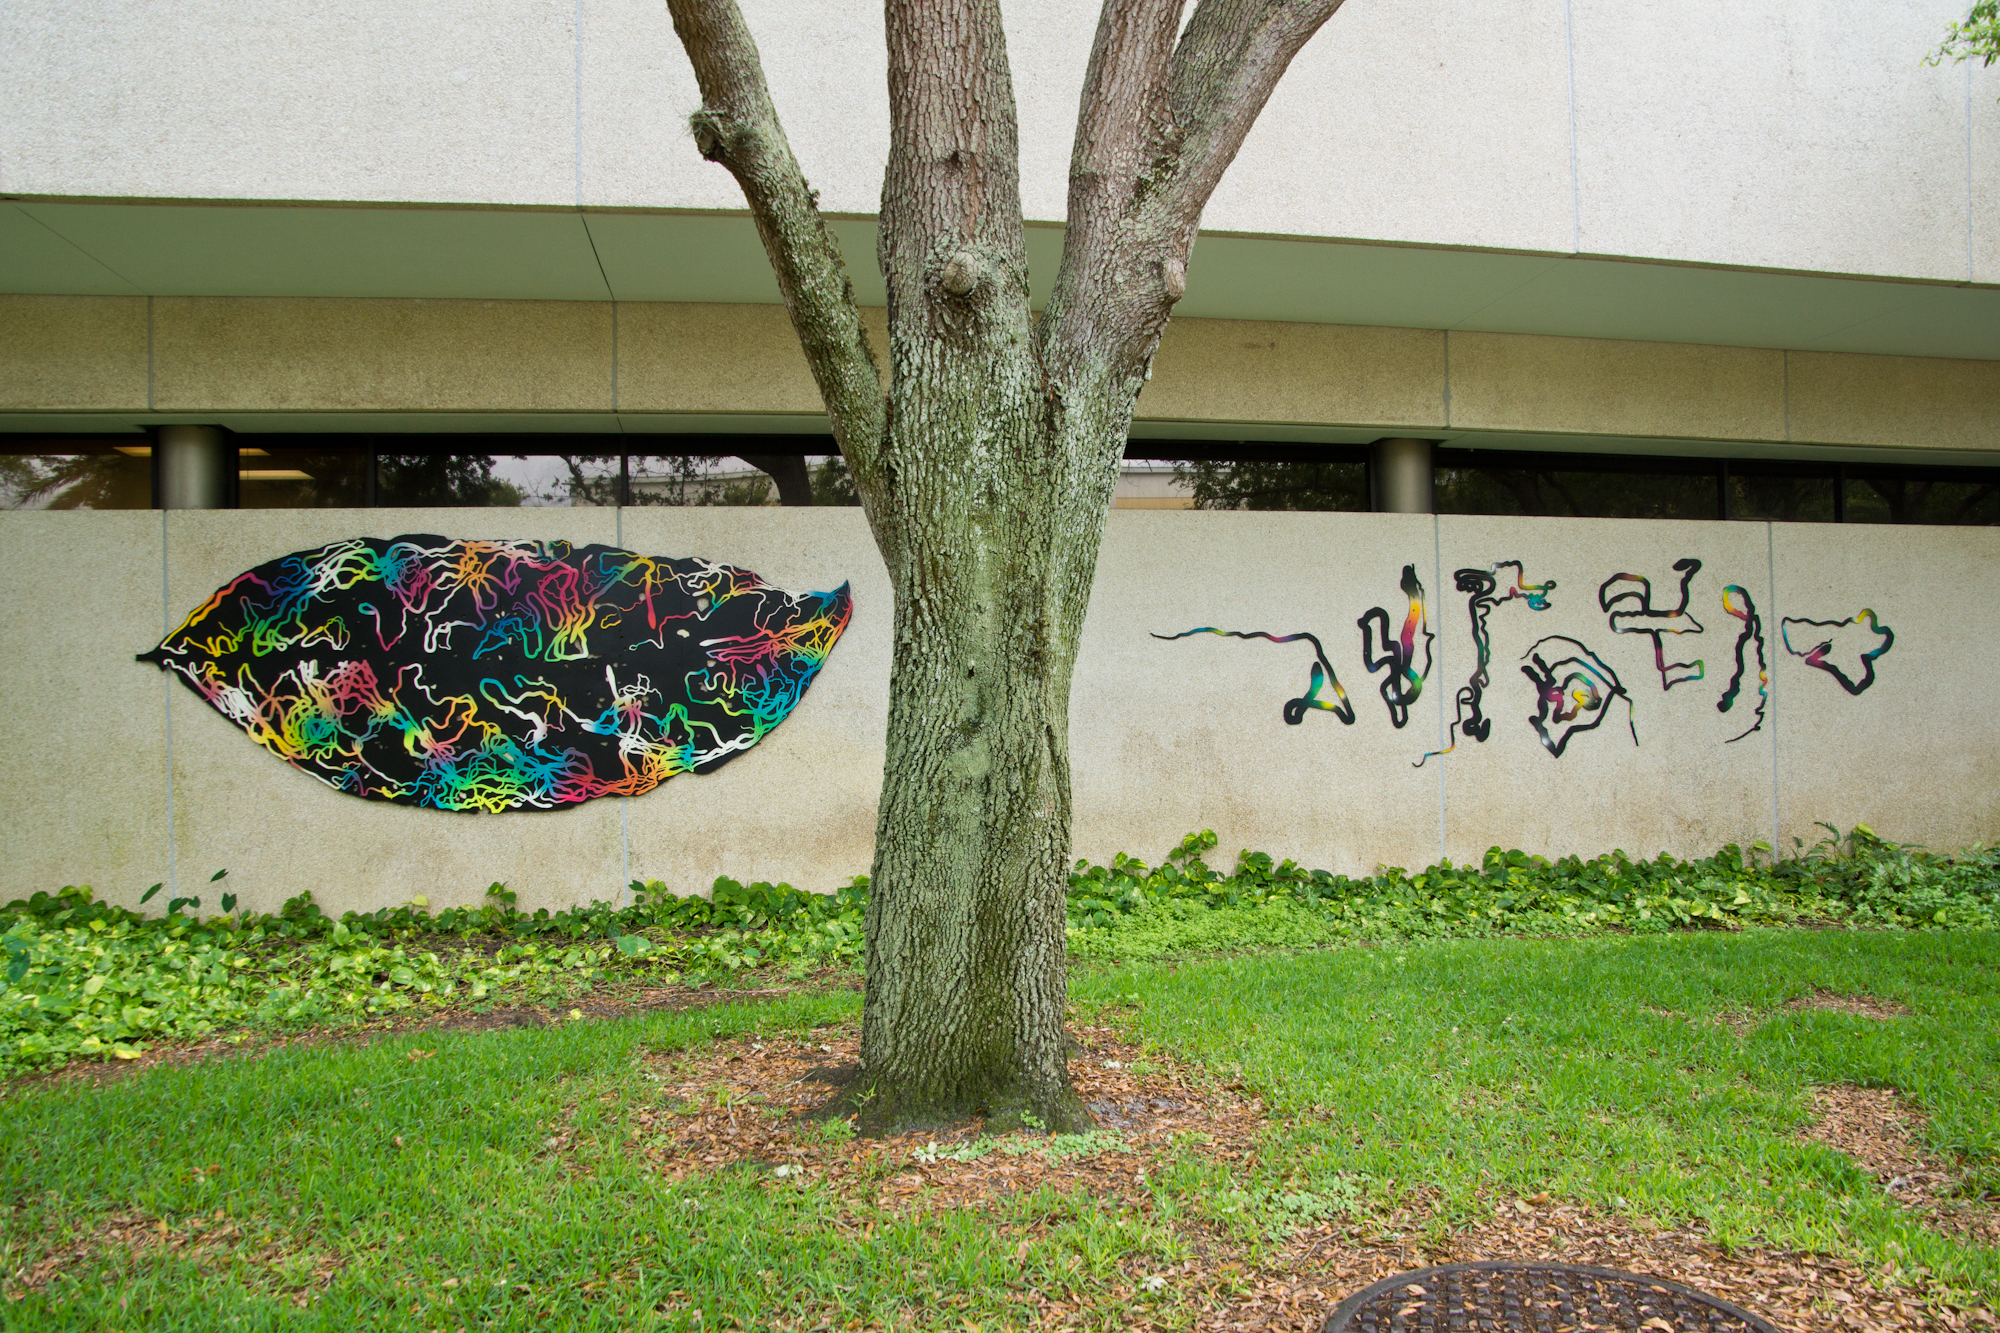 Paths of Consumption: USFSP (University of South Florida - Downtown St.Petersburg, FL) 